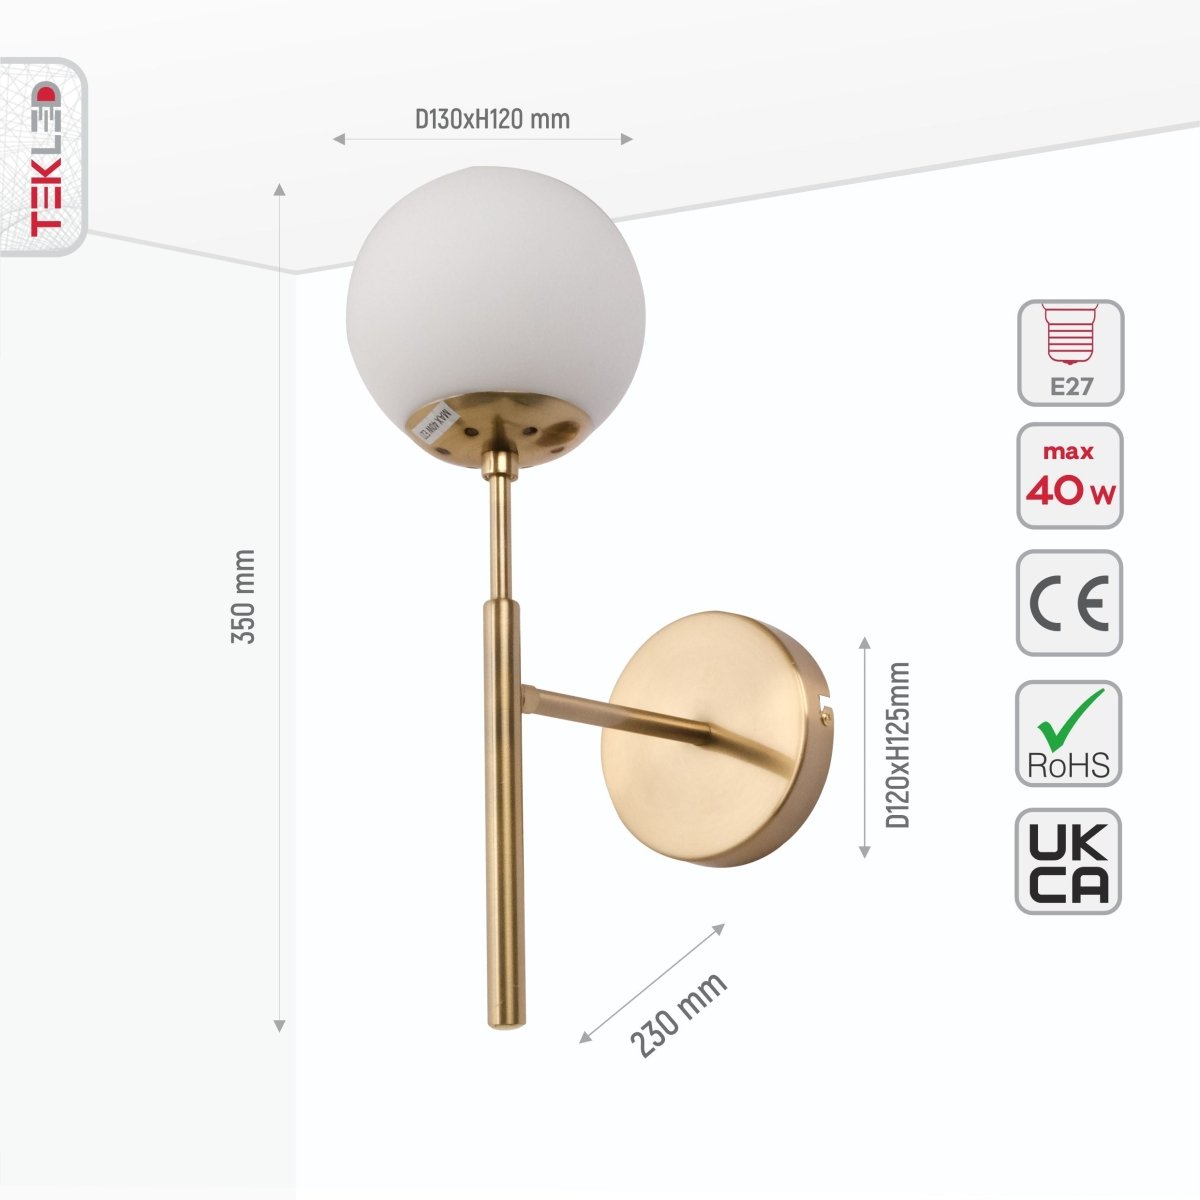 Size and specs of Opal Glass Gold Metal Wall Light with E27 Fitting | TEKLED 151-19720